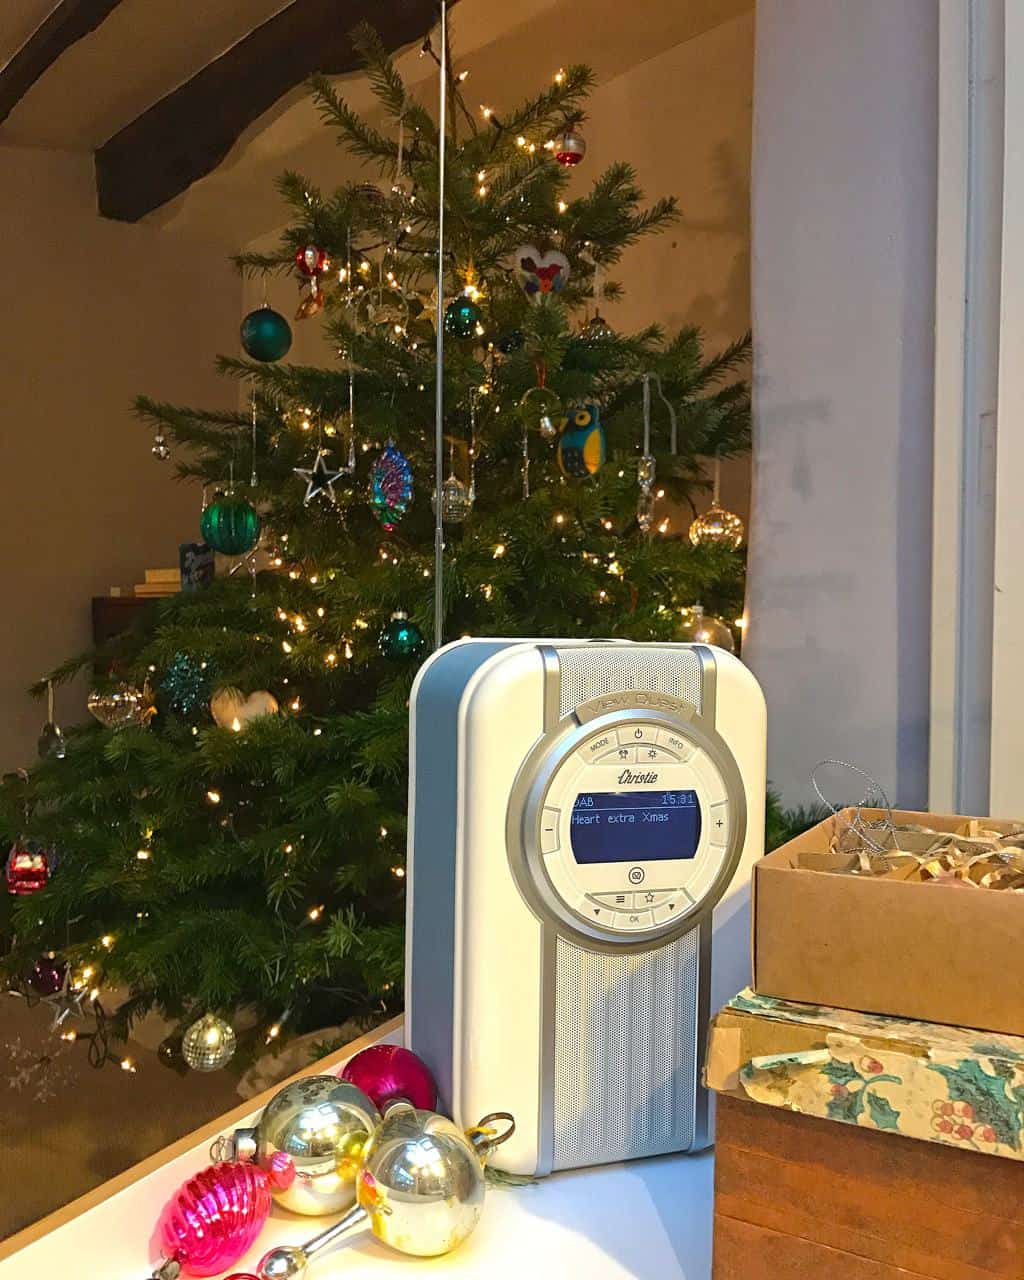 Decorating the Christmas Tree with the VQ Christie Radio